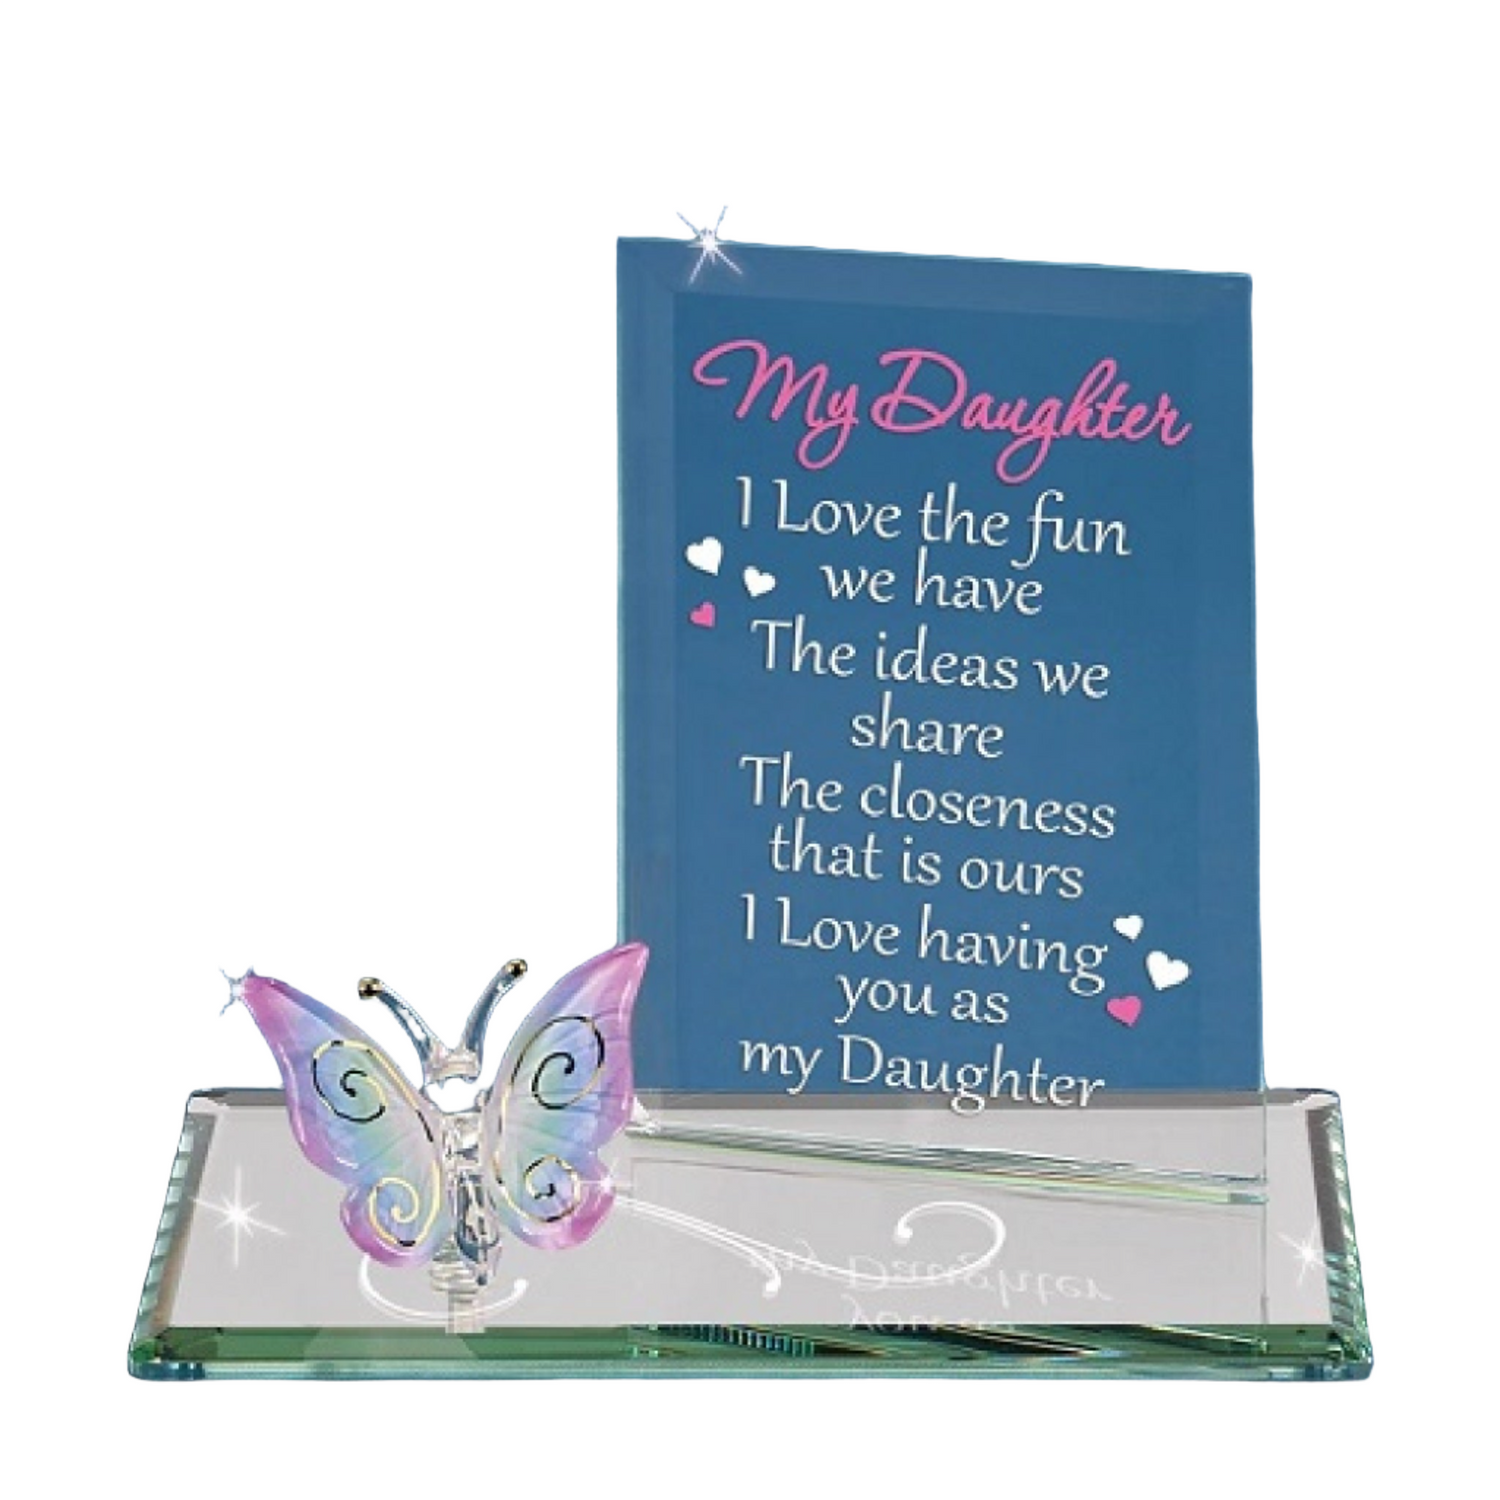 Glass Baron "My Daughter" Plaque